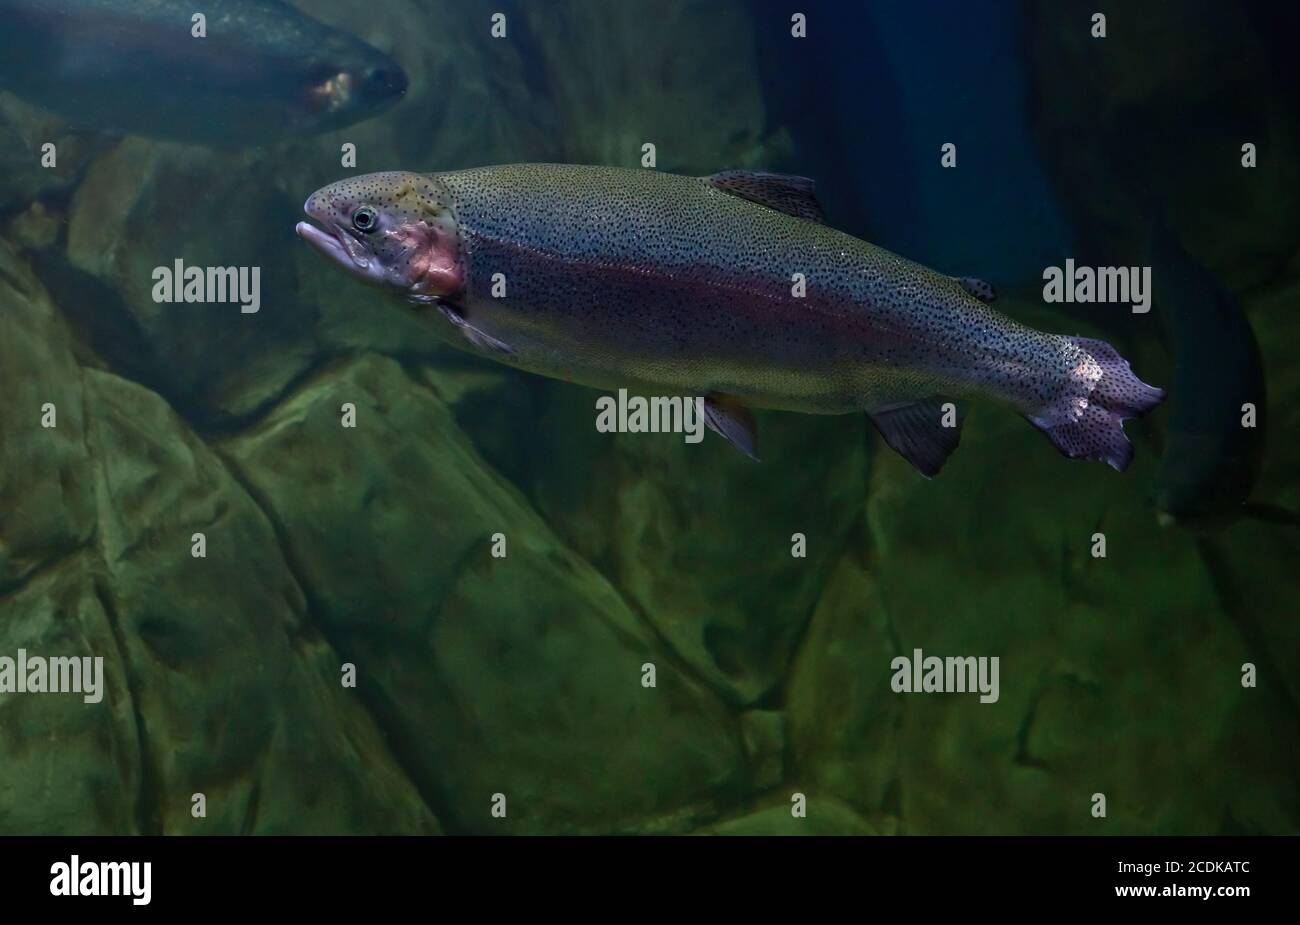 Rainbow trout or Salmon trout (Oncorhynchus mykiss) close-up underwater Stock Photo